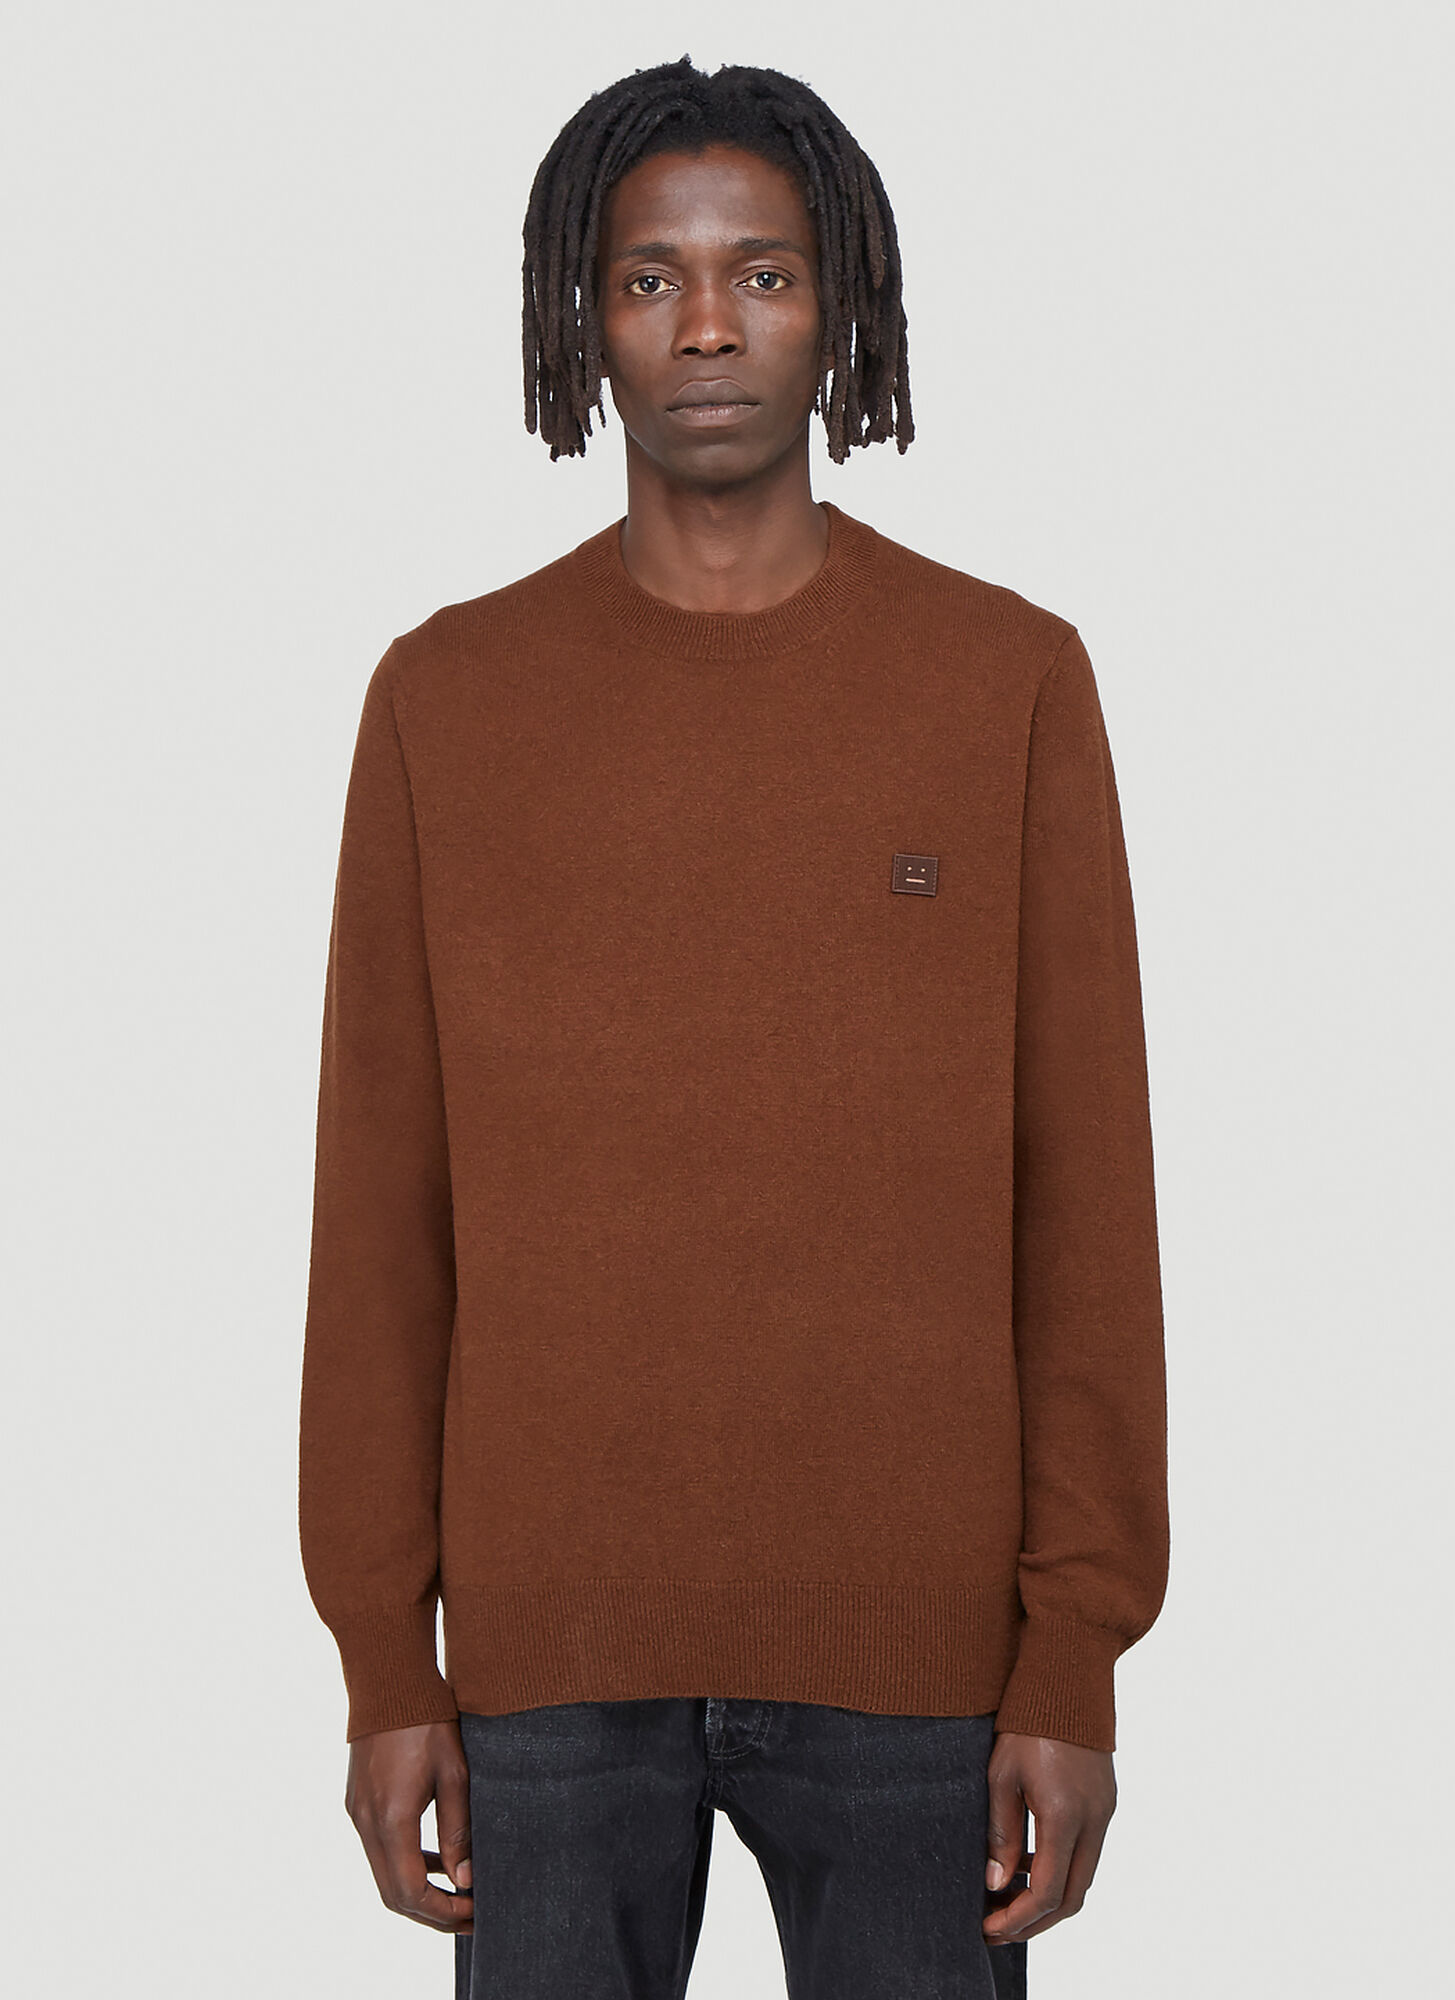 Acne Studios Face Knitted Sweater in Brown size M | The Fashionisto